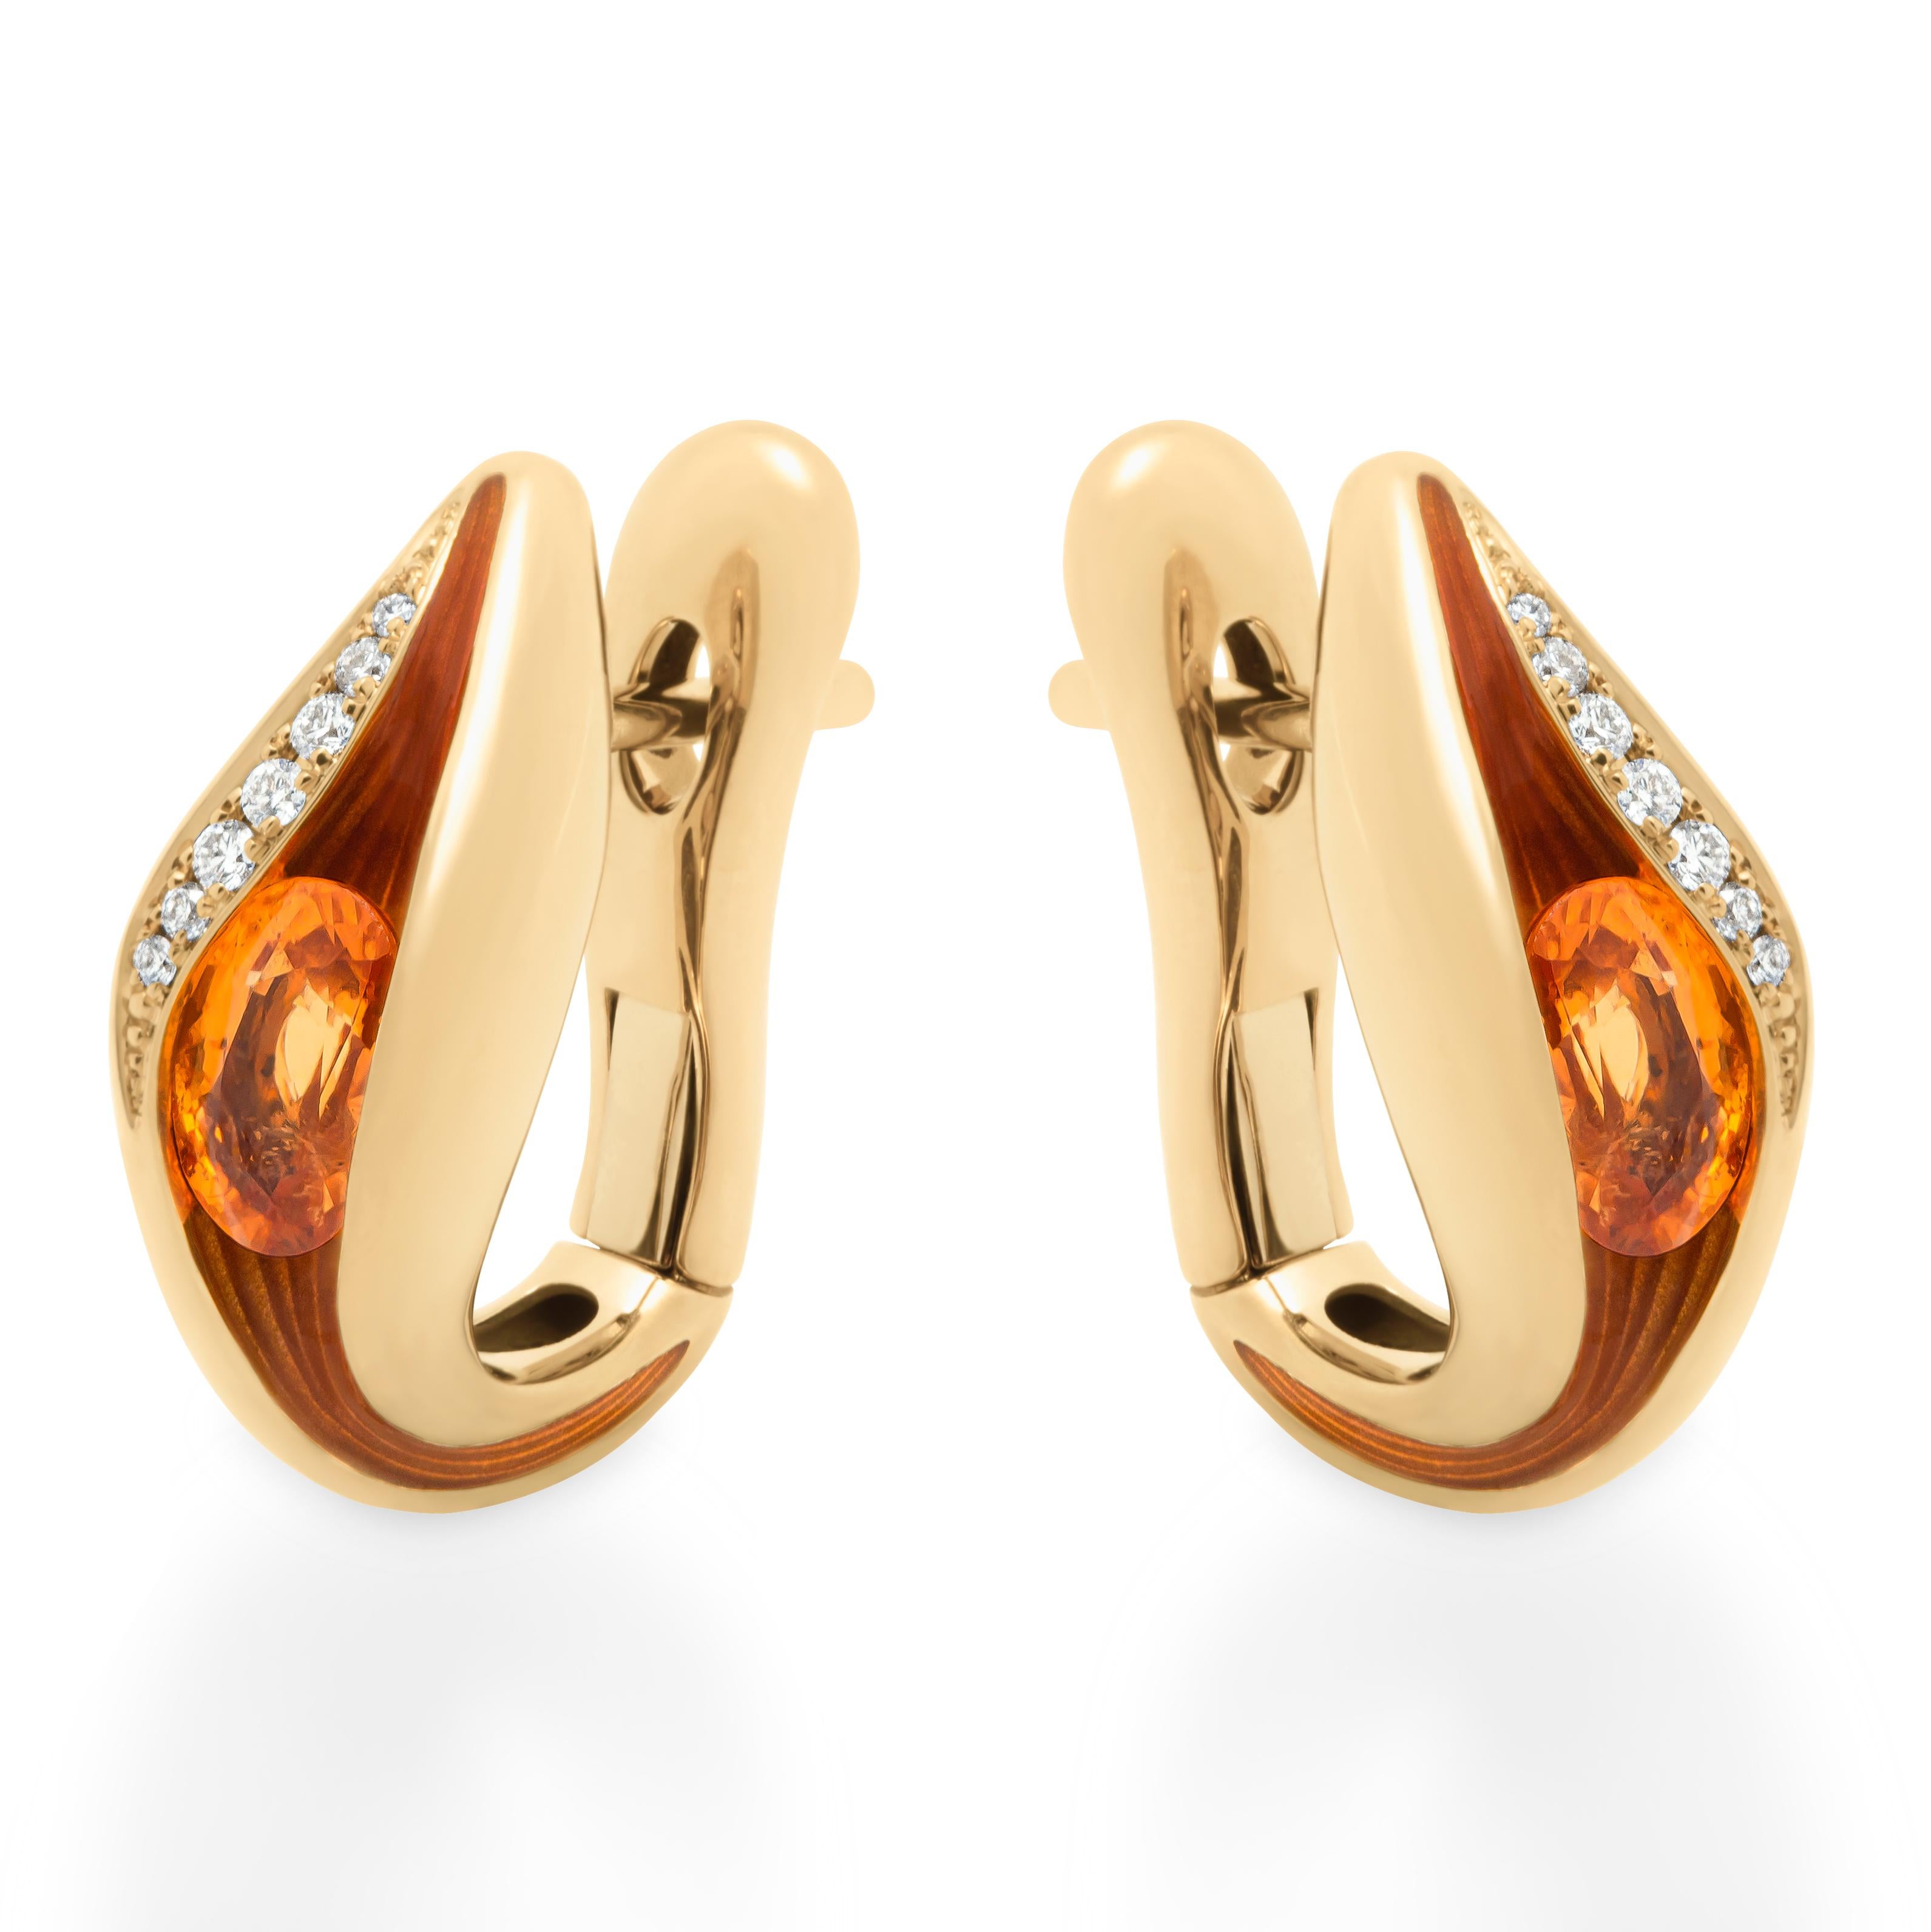 Spessartine 1.05 Carat Diamonds Enamel 18 Karat Yellow Gold Melted Colors Earrings
Our new collection 